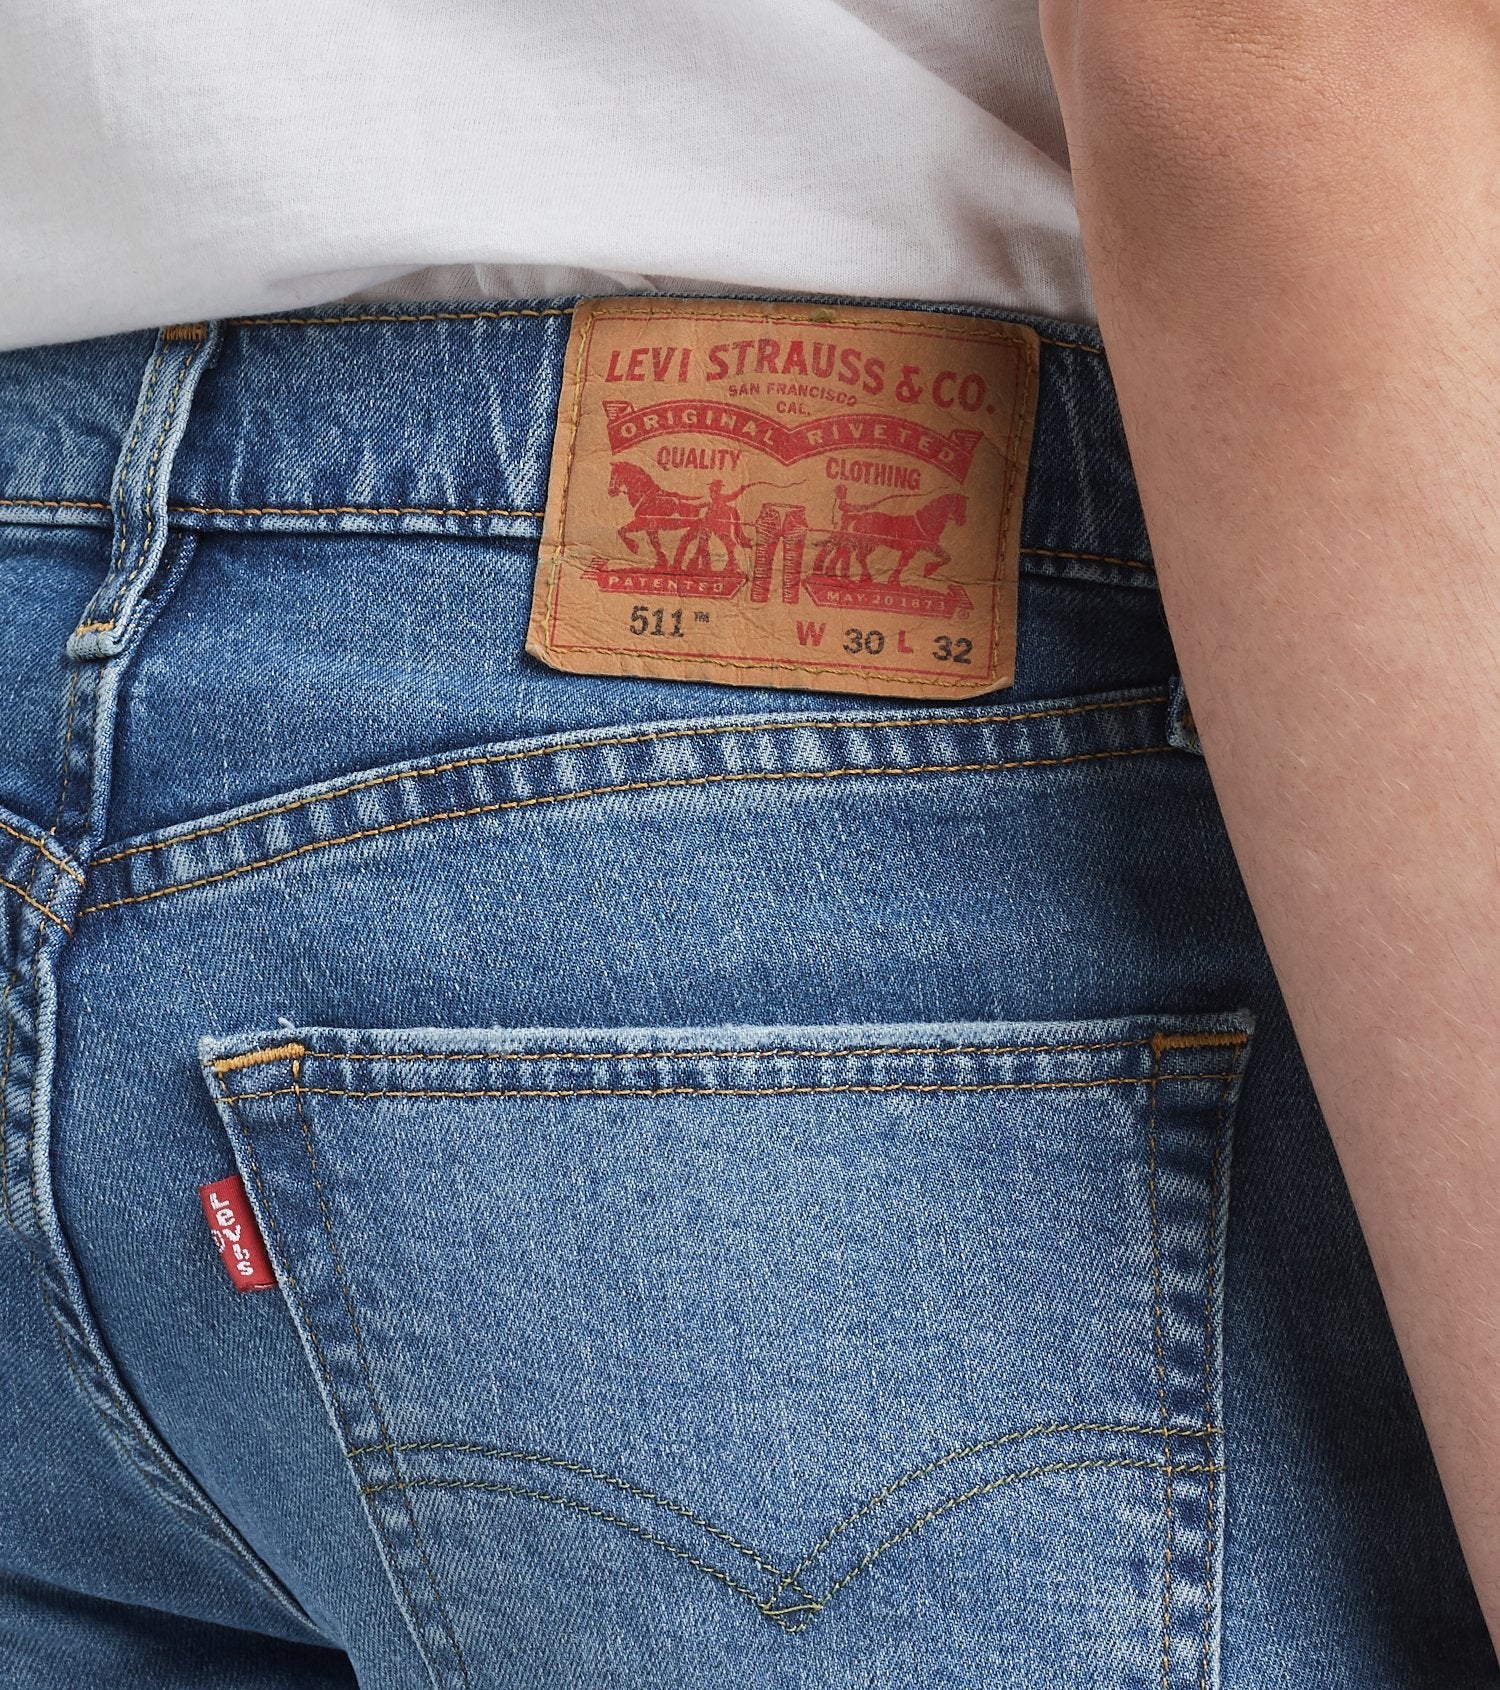 Levi Strauss to acquire athletic wear maker Beyond Yoga